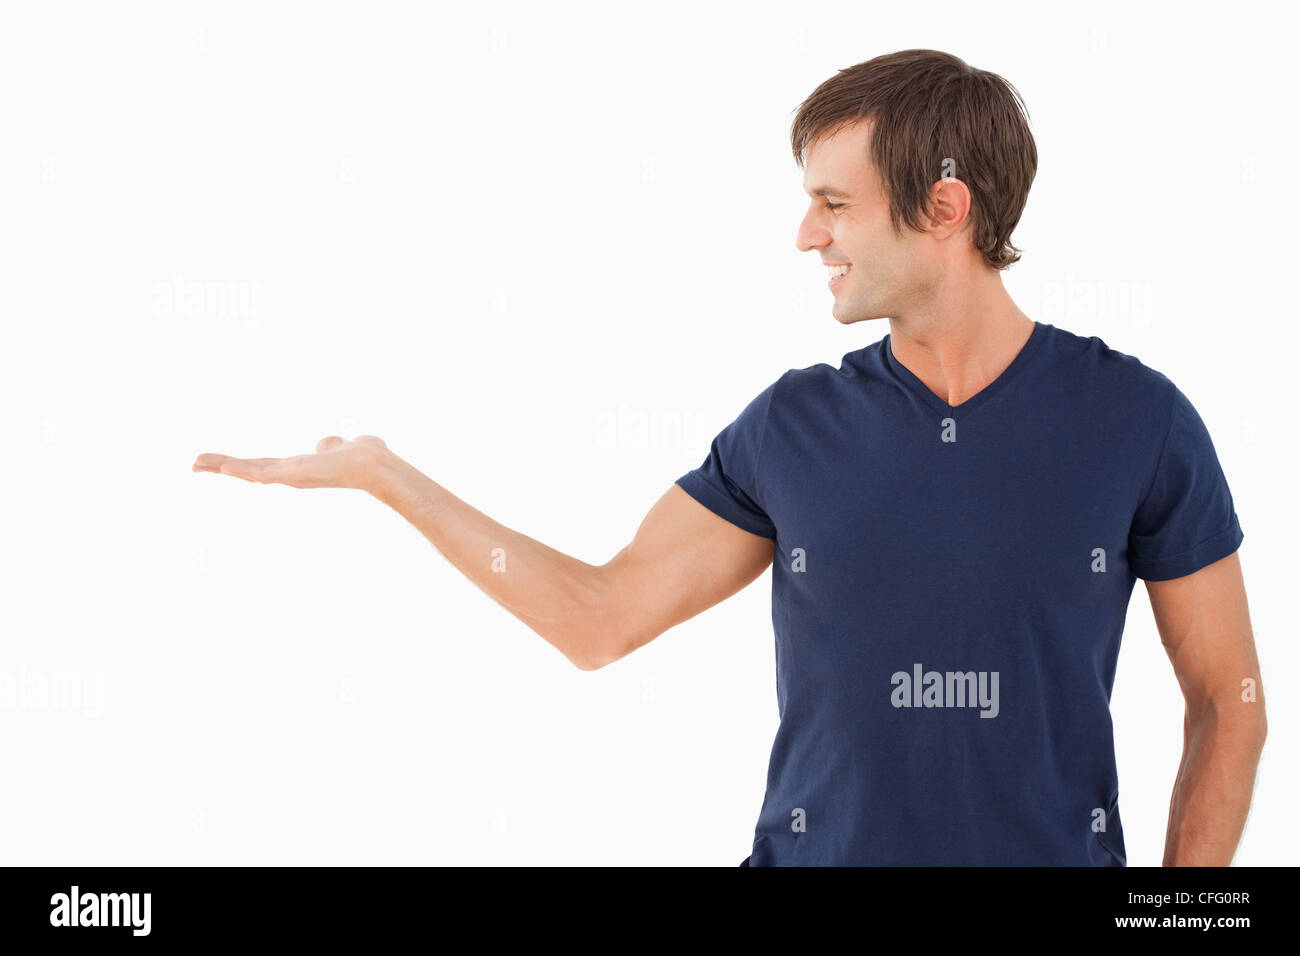 Smiling man standing upright with hand palm up Stock Photo